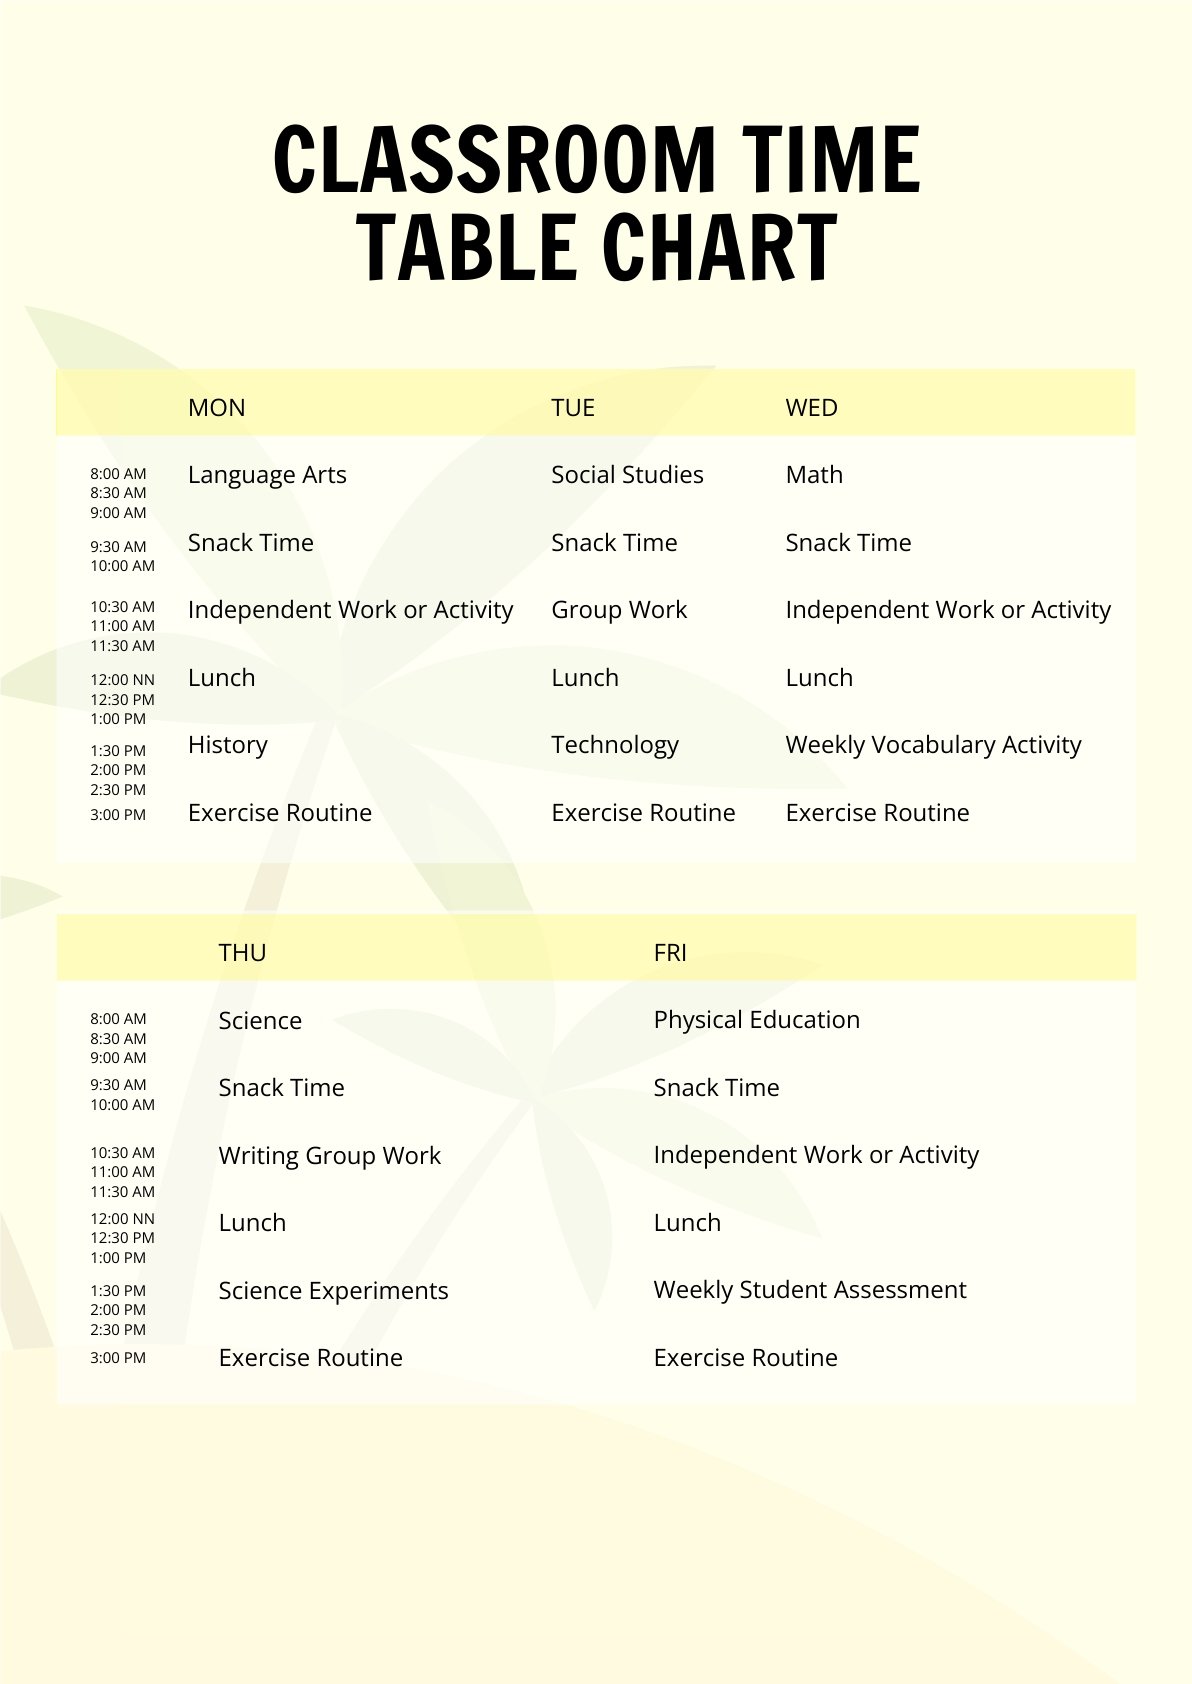 Free Classroom Time Table Chart Template